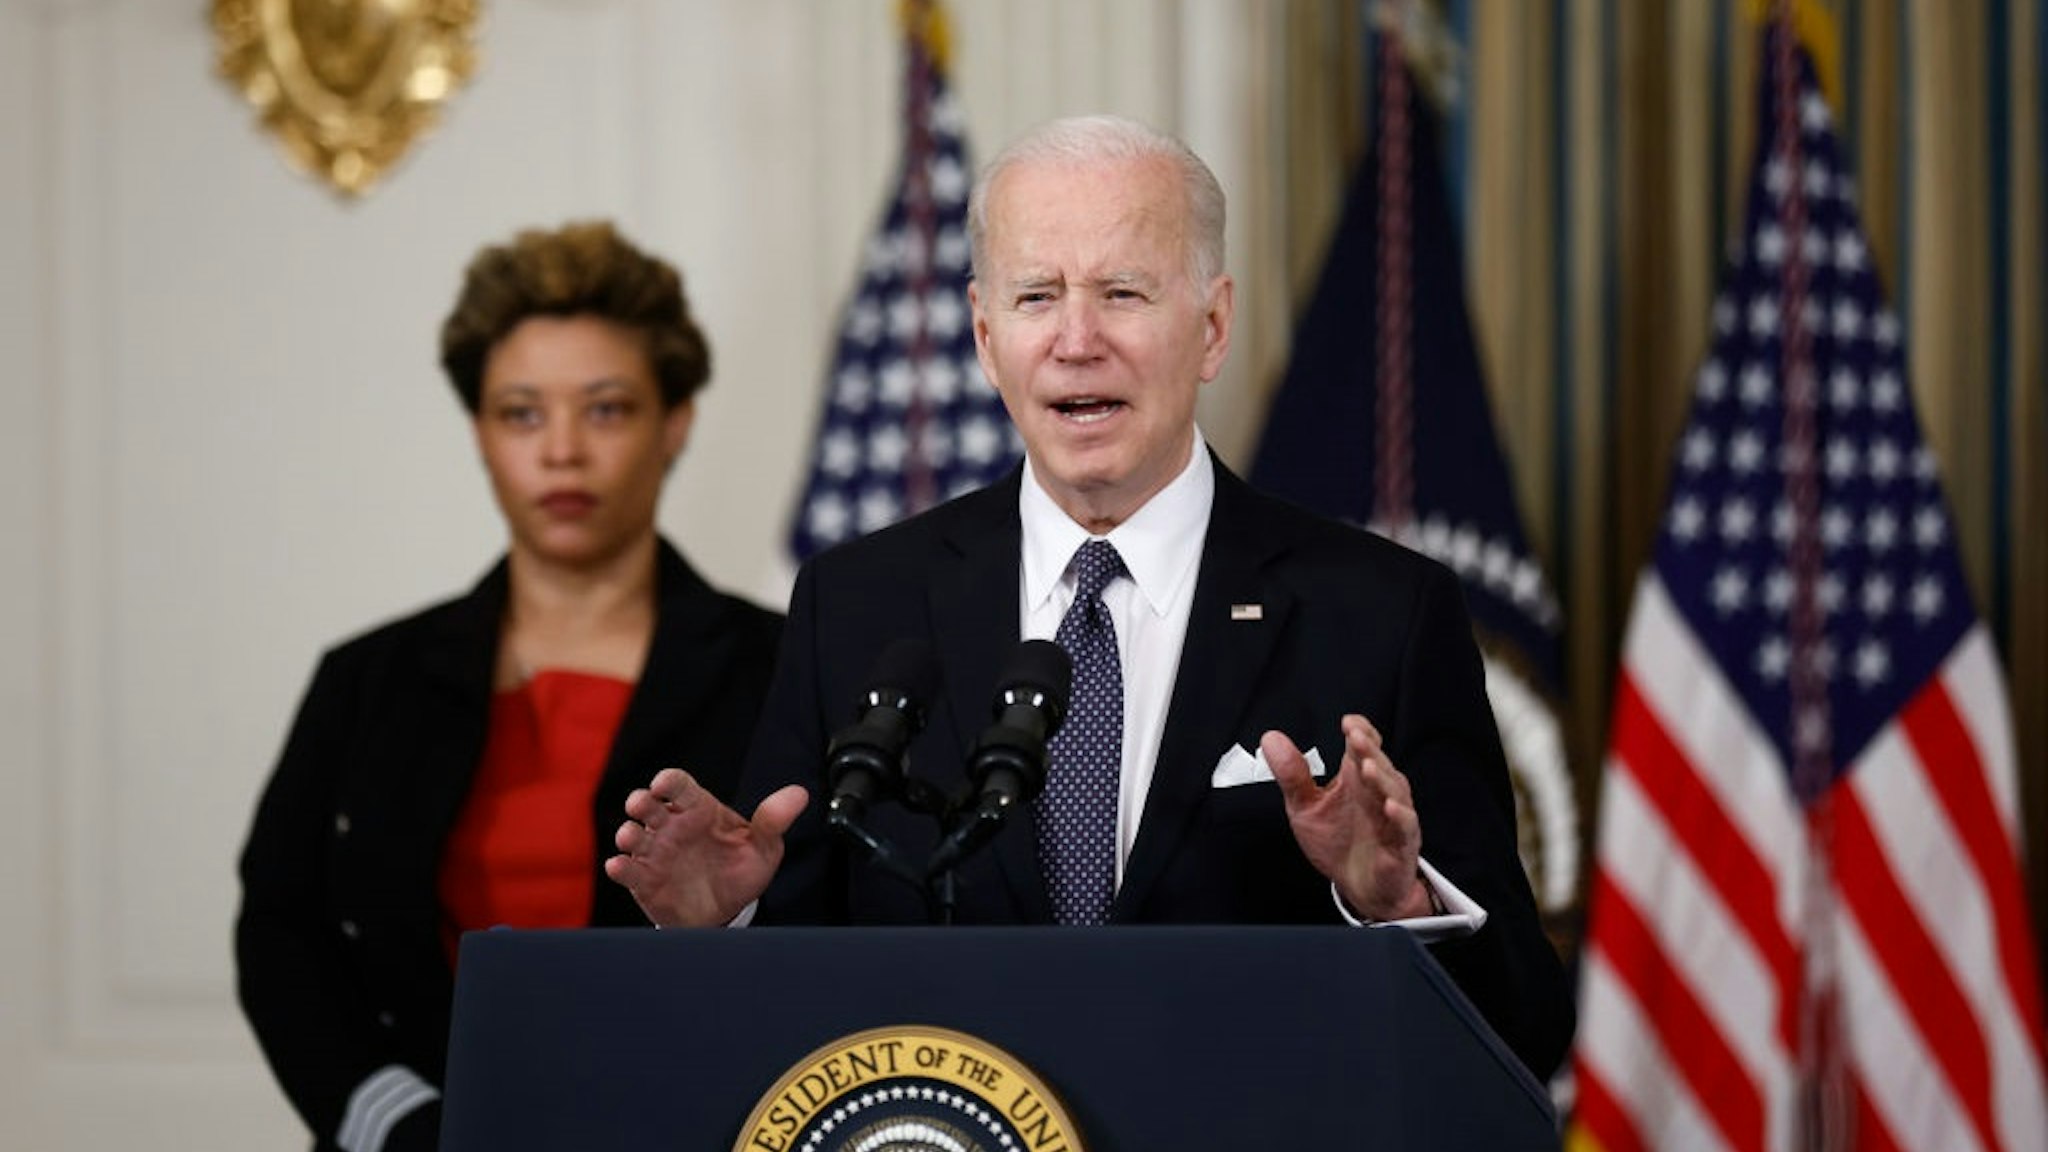 U.S. President Joe Biden speaks about his budget for fiscal year 2023 in the State Dining Room of the White House in Washington, D.C., U.S., on Monday, March 28, 2022.